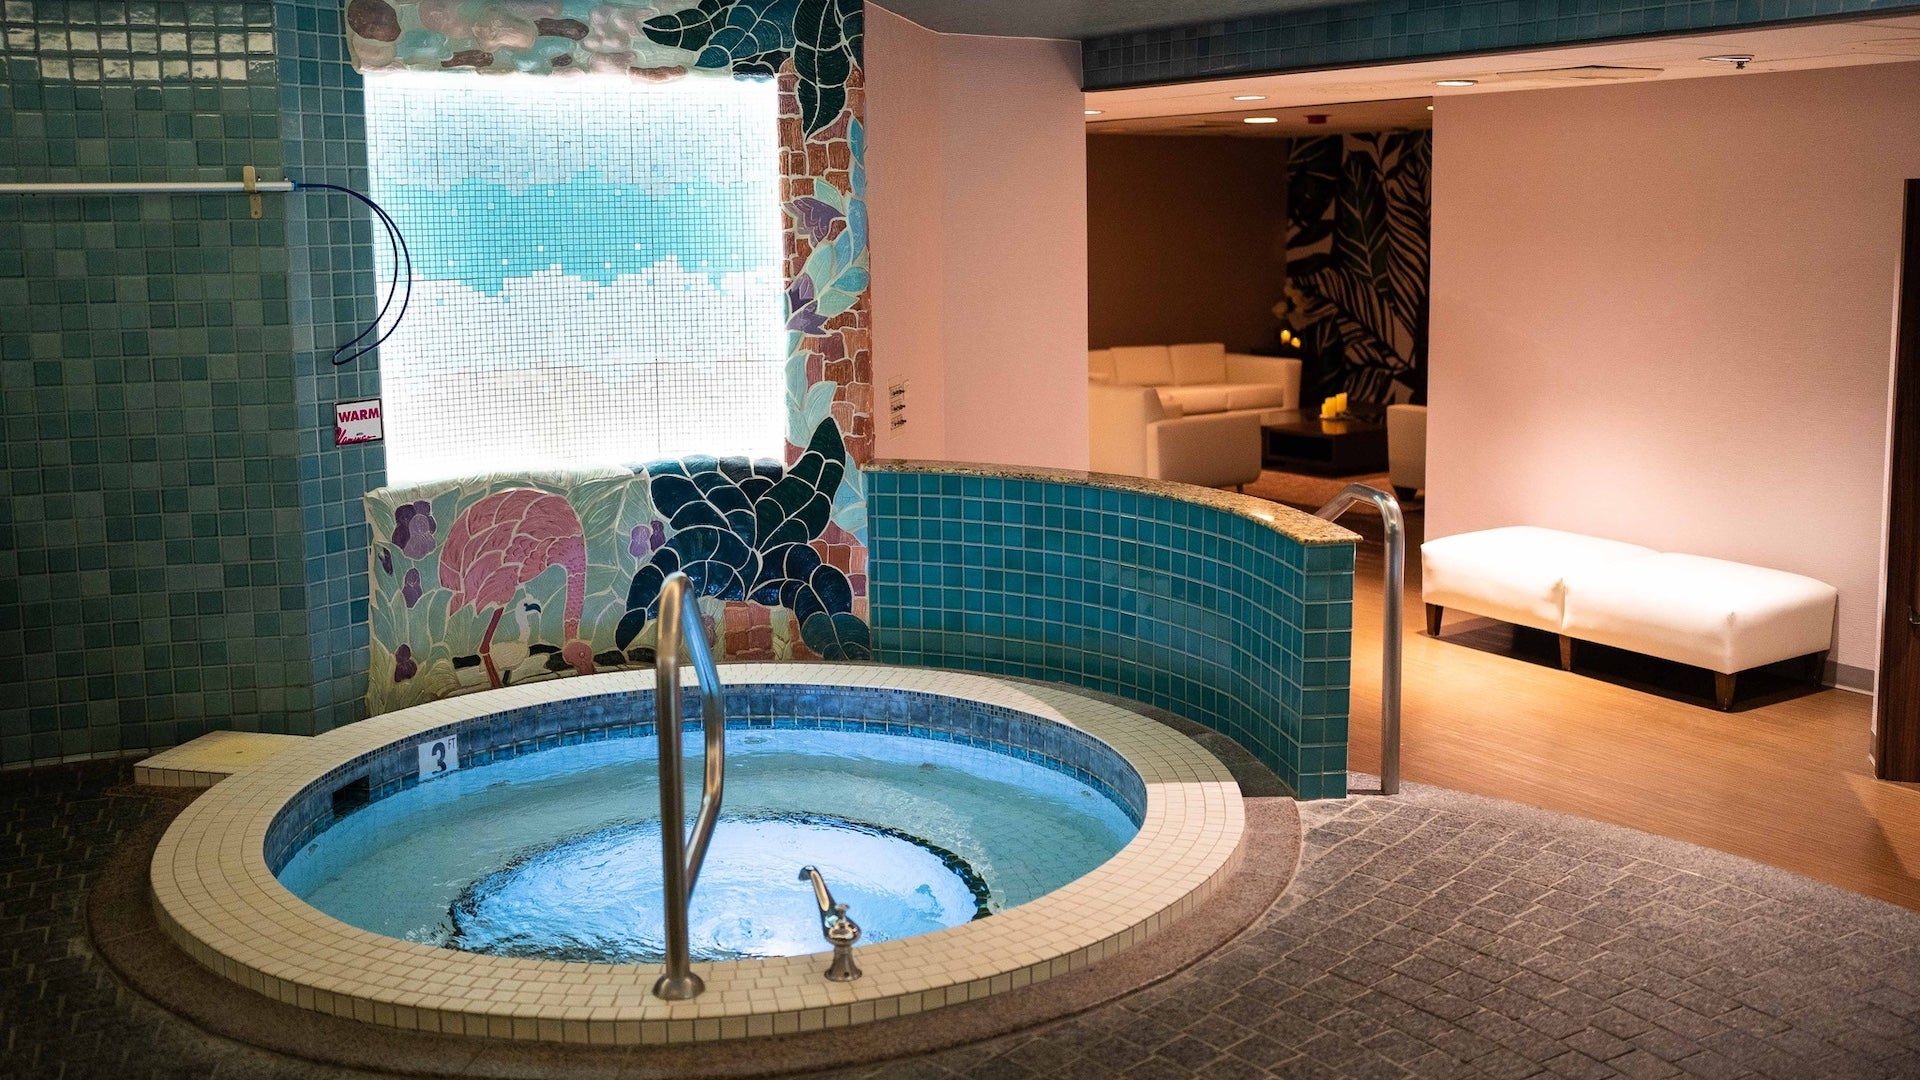 Interior shot of a small round hot tub with blue tile walls and a daybed in the background